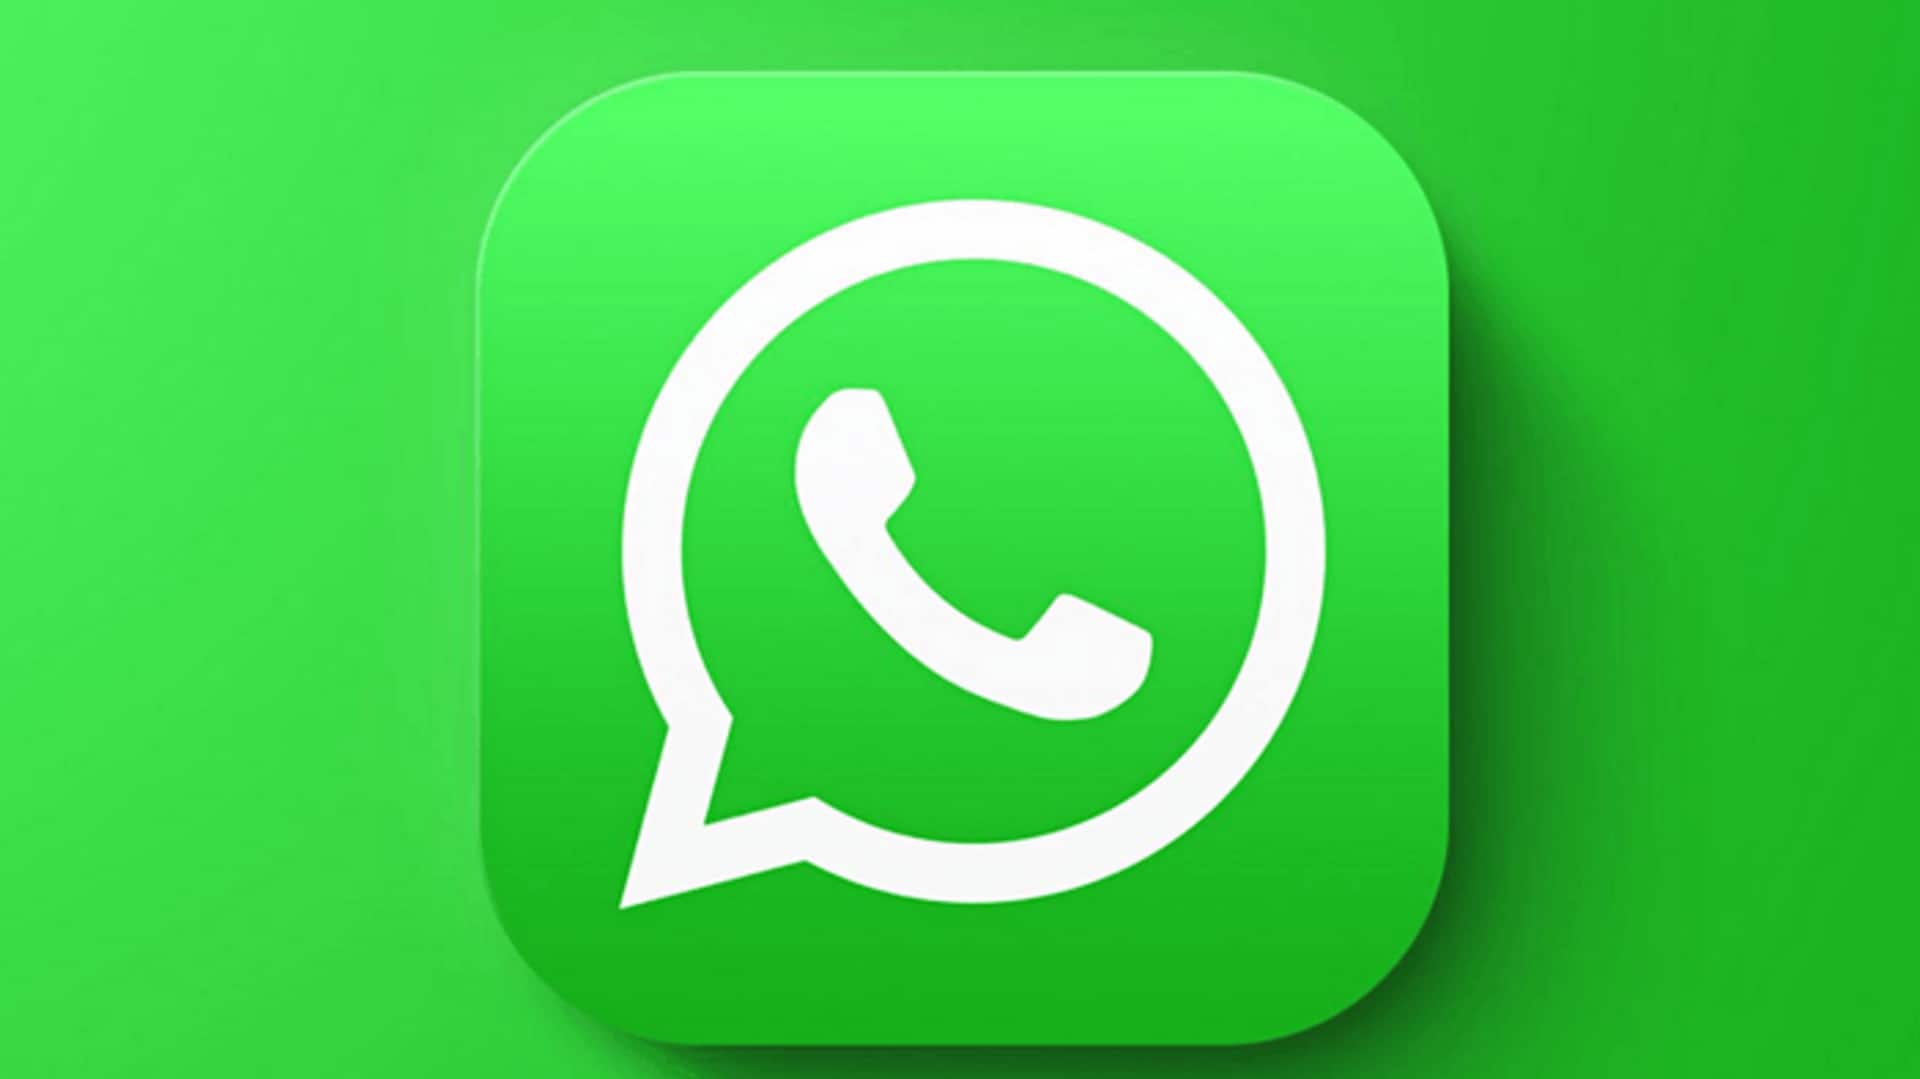 Top 5 WhatsApp features you must know about 